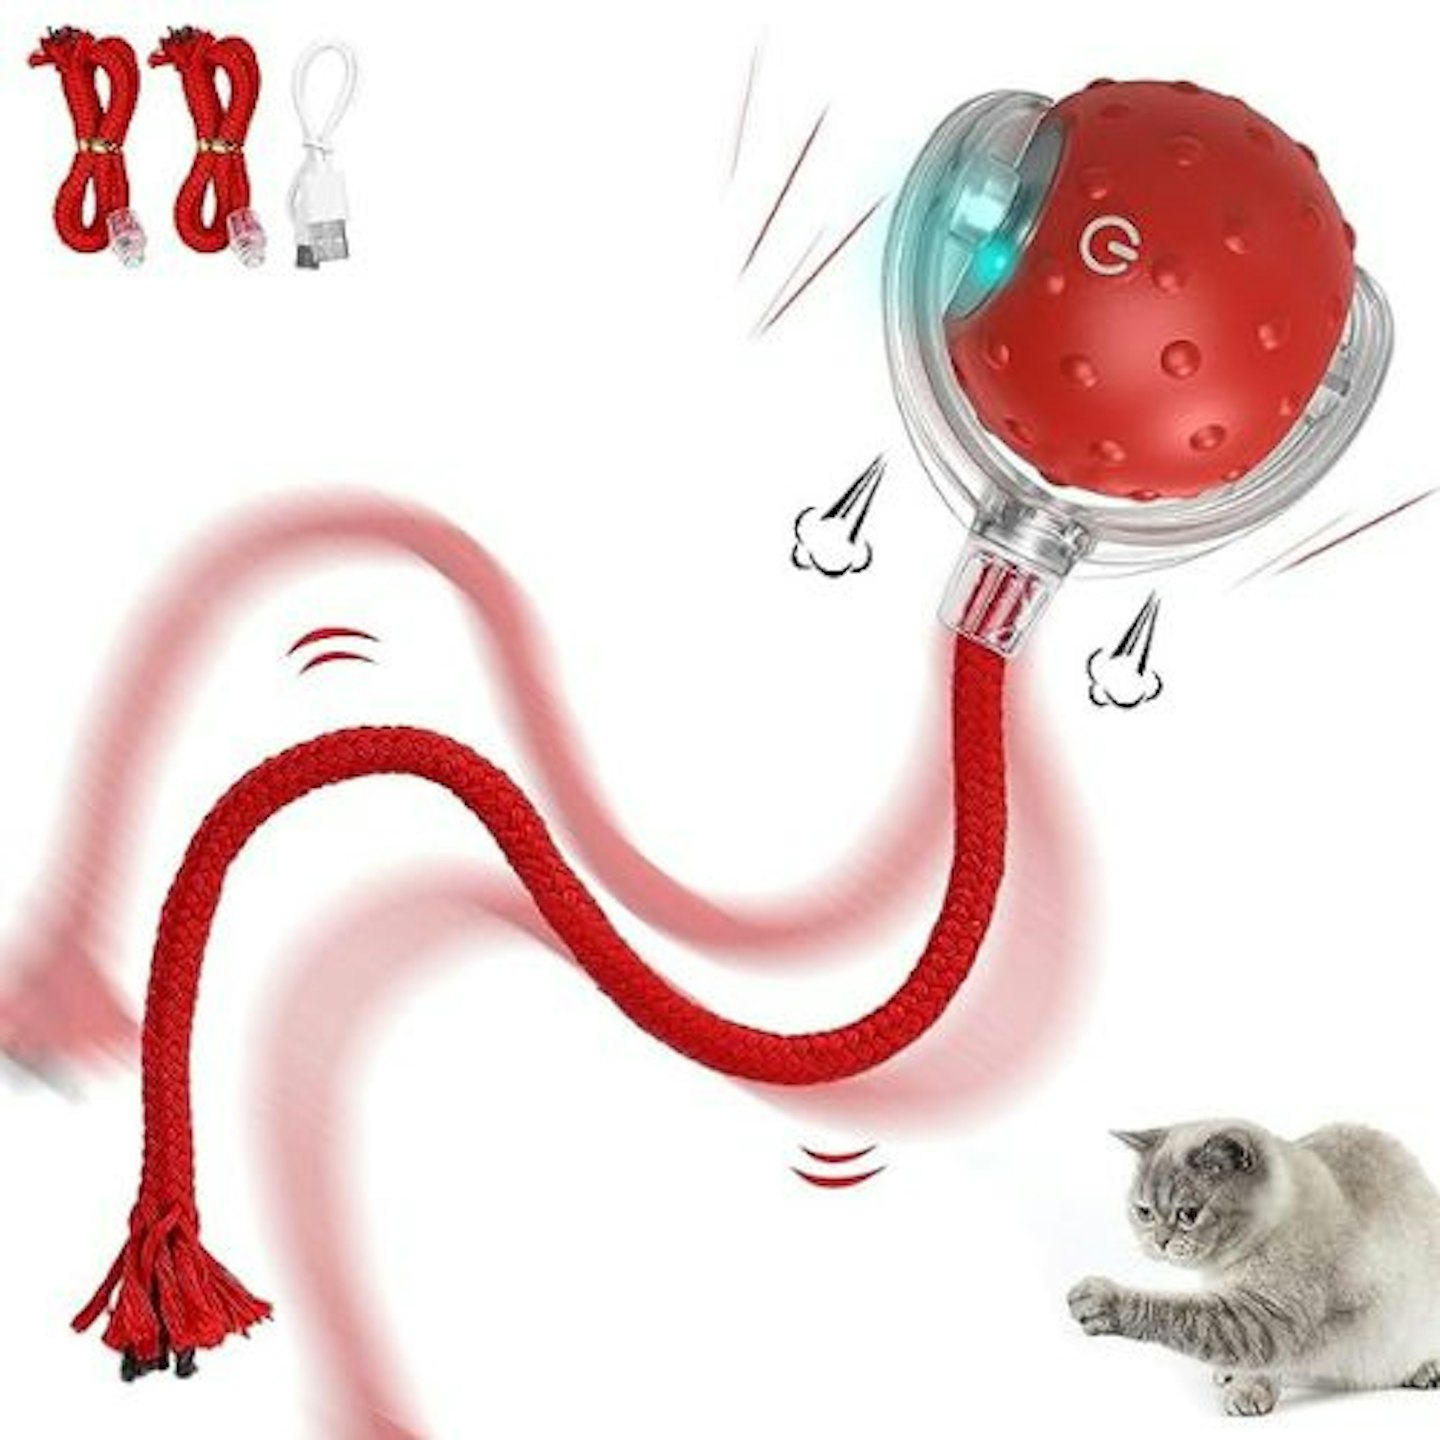 Best Interactive Cat Toys for Mental Stimulation